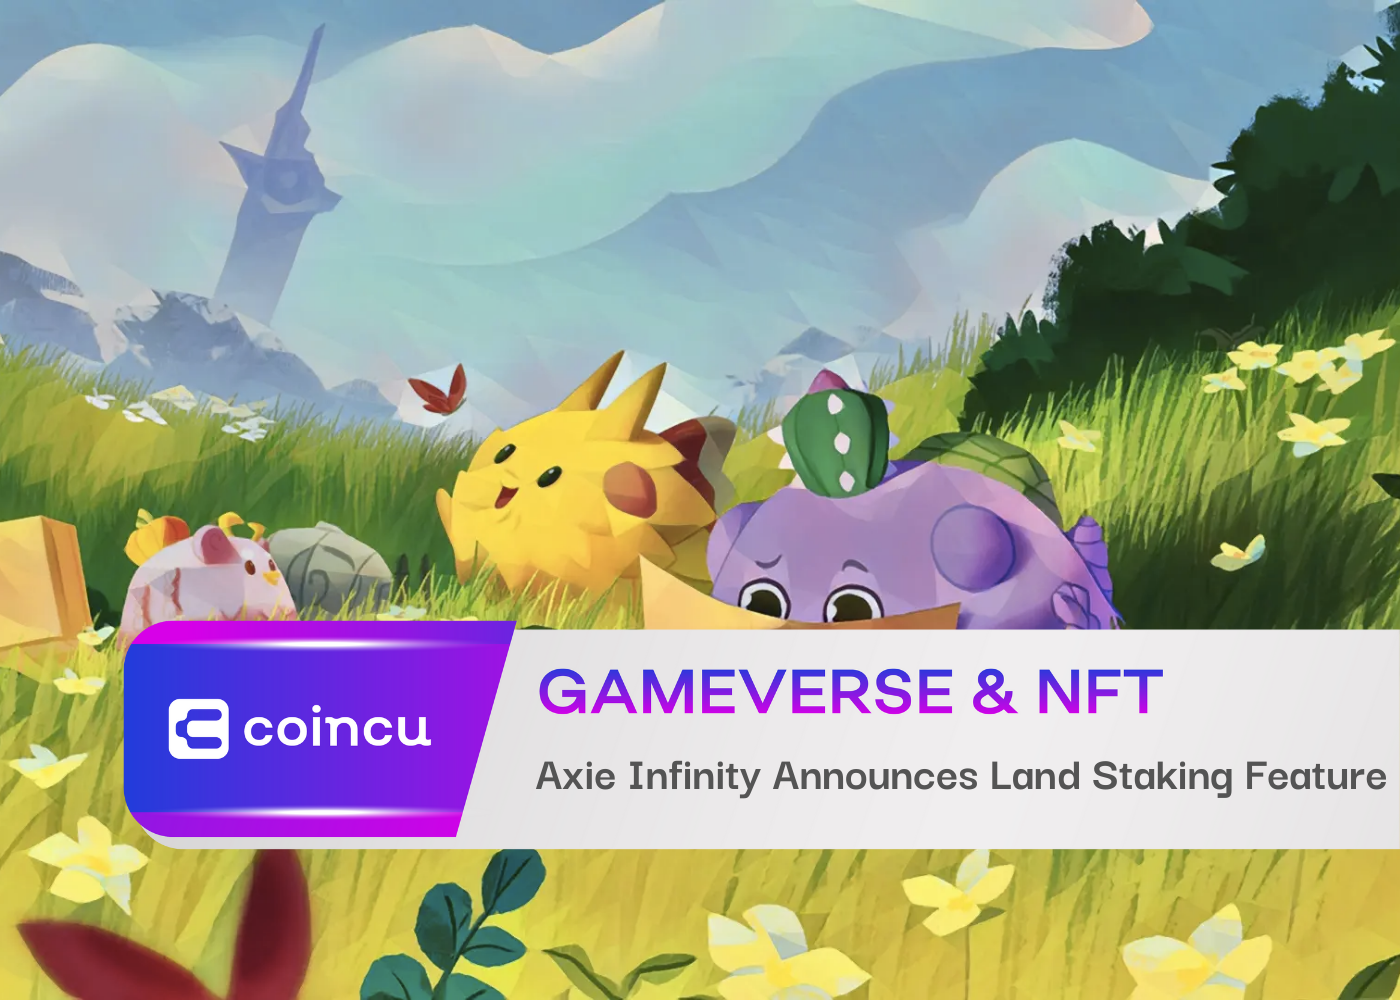 Axie Infinity Announces Land Staking Feature